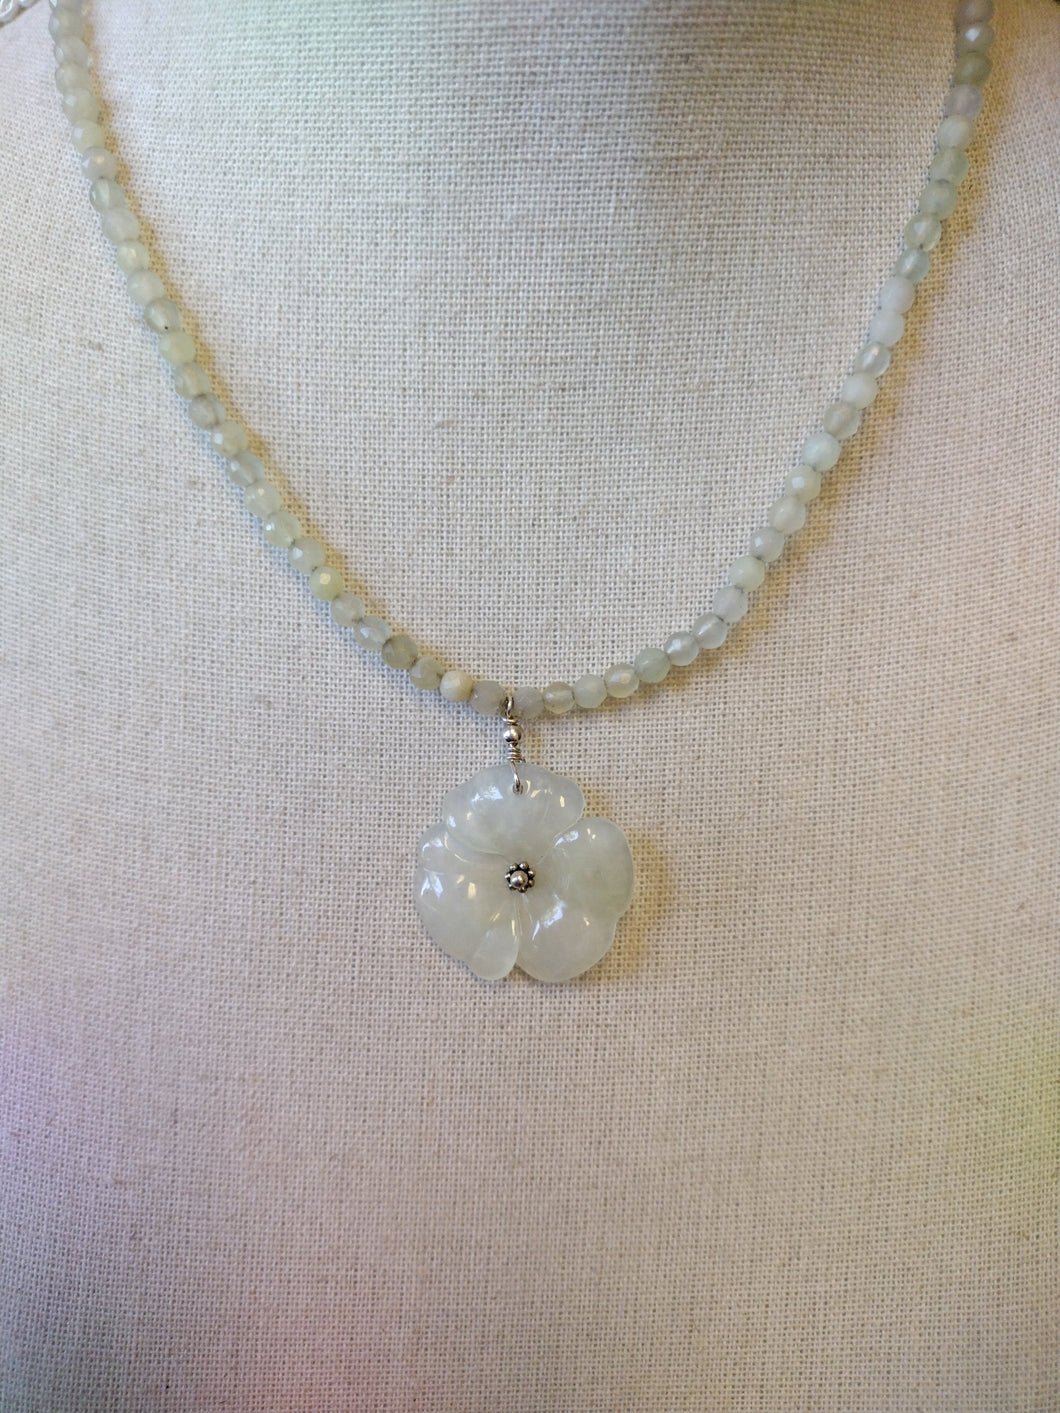 Special Value Item-S.S. Faceted Jade Necklace with Floral Pendant